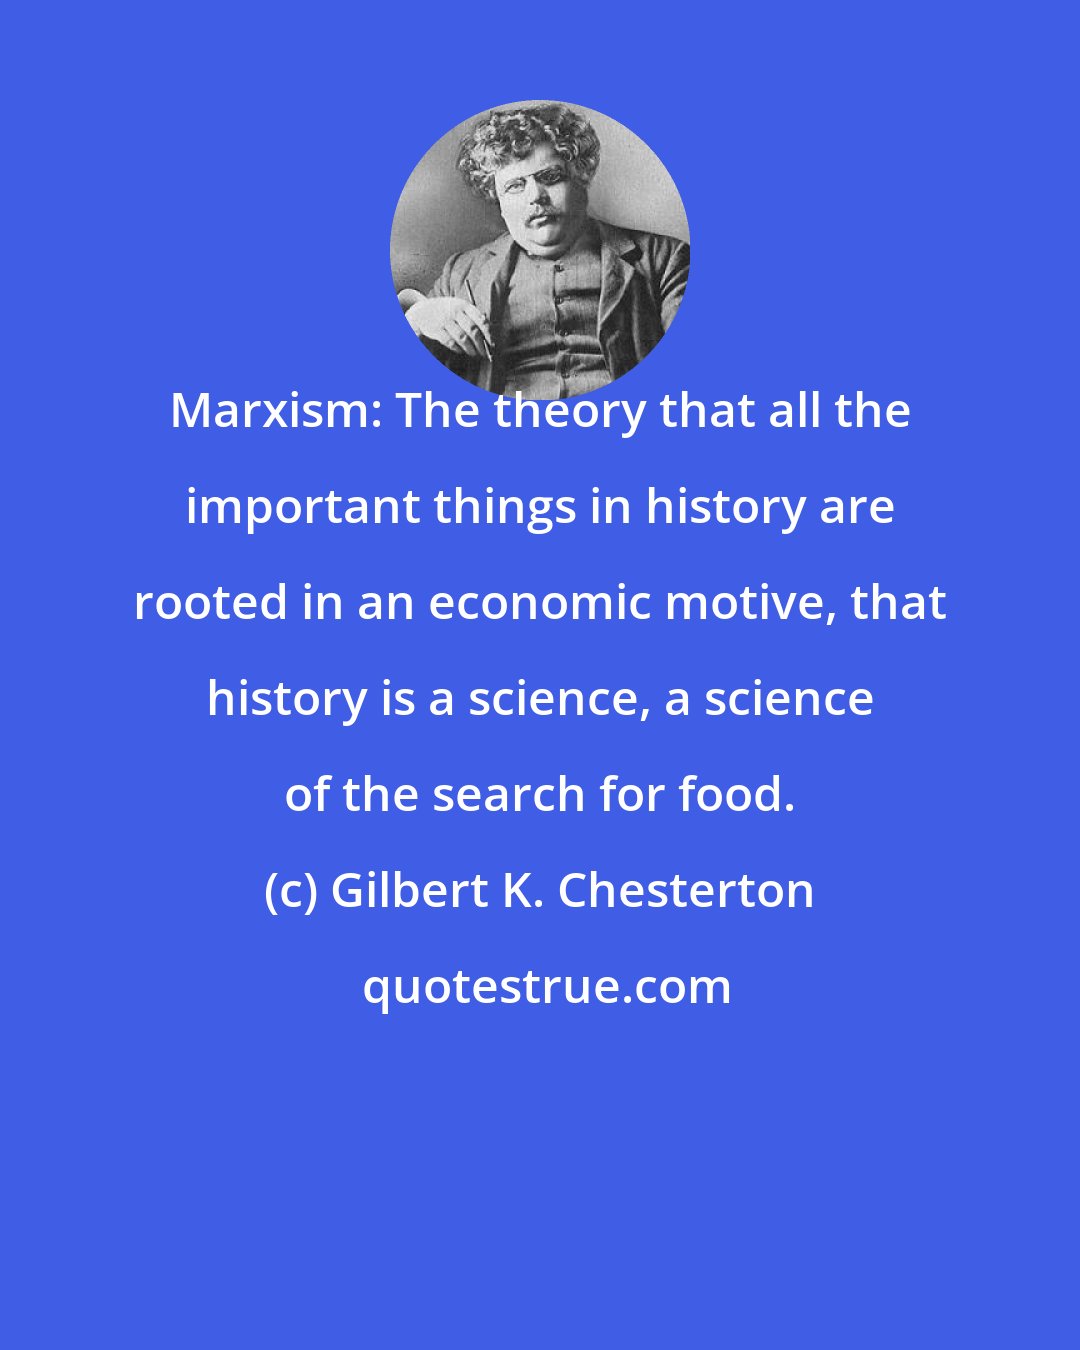 Gilbert K. Chesterton: Marxism: The theory that all the important things in history are rooted in an economic motive, that history is a science, a science of the search for food.